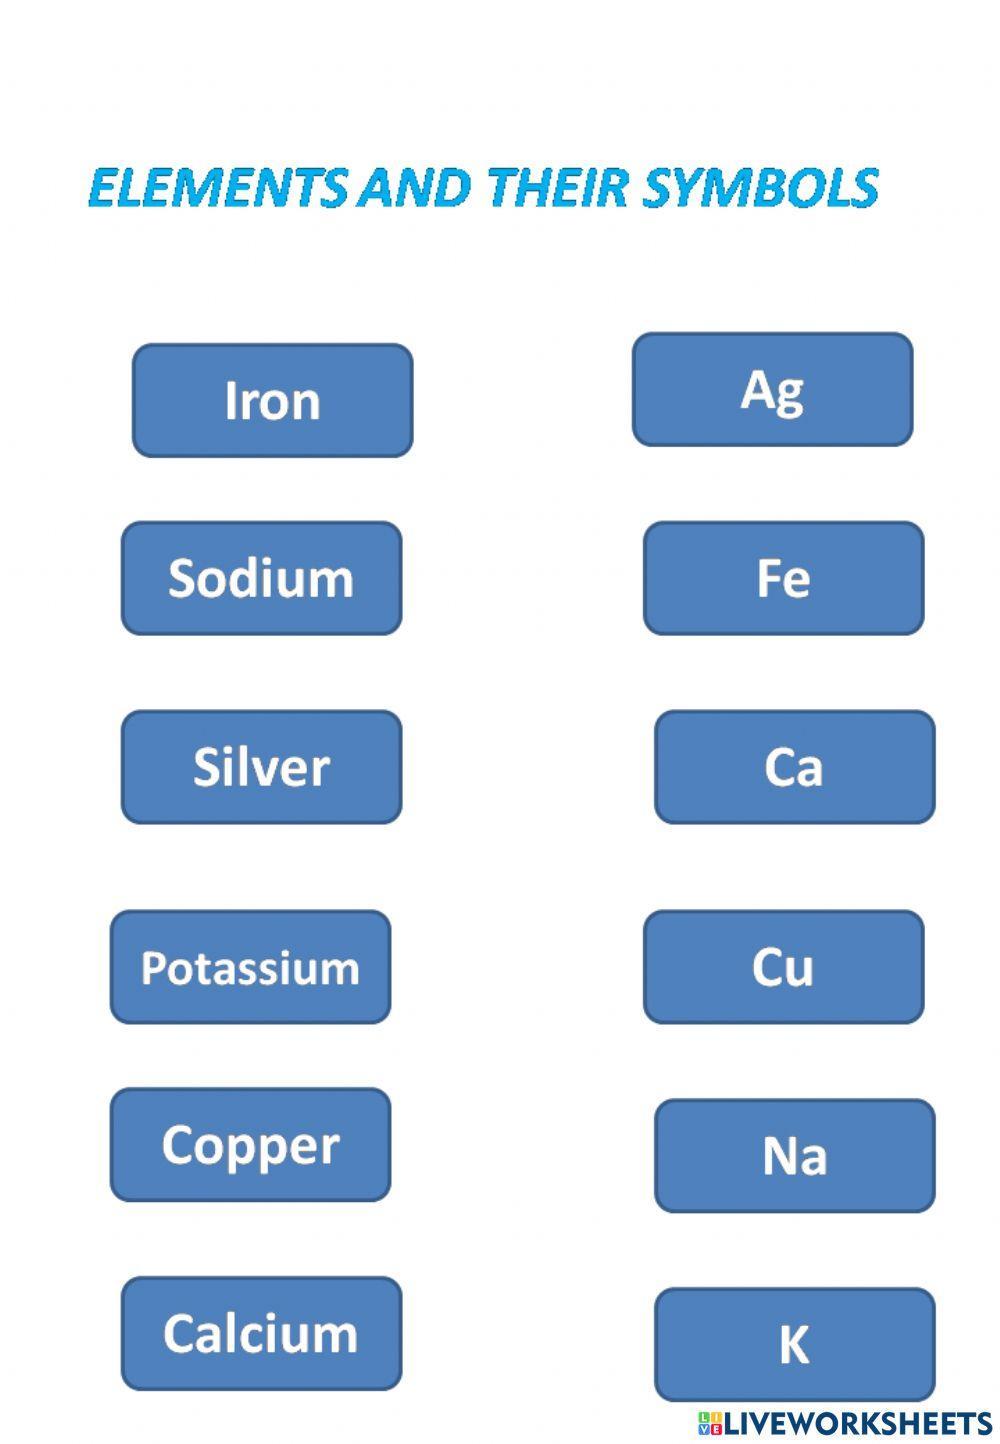 Match the following elements with their symbols